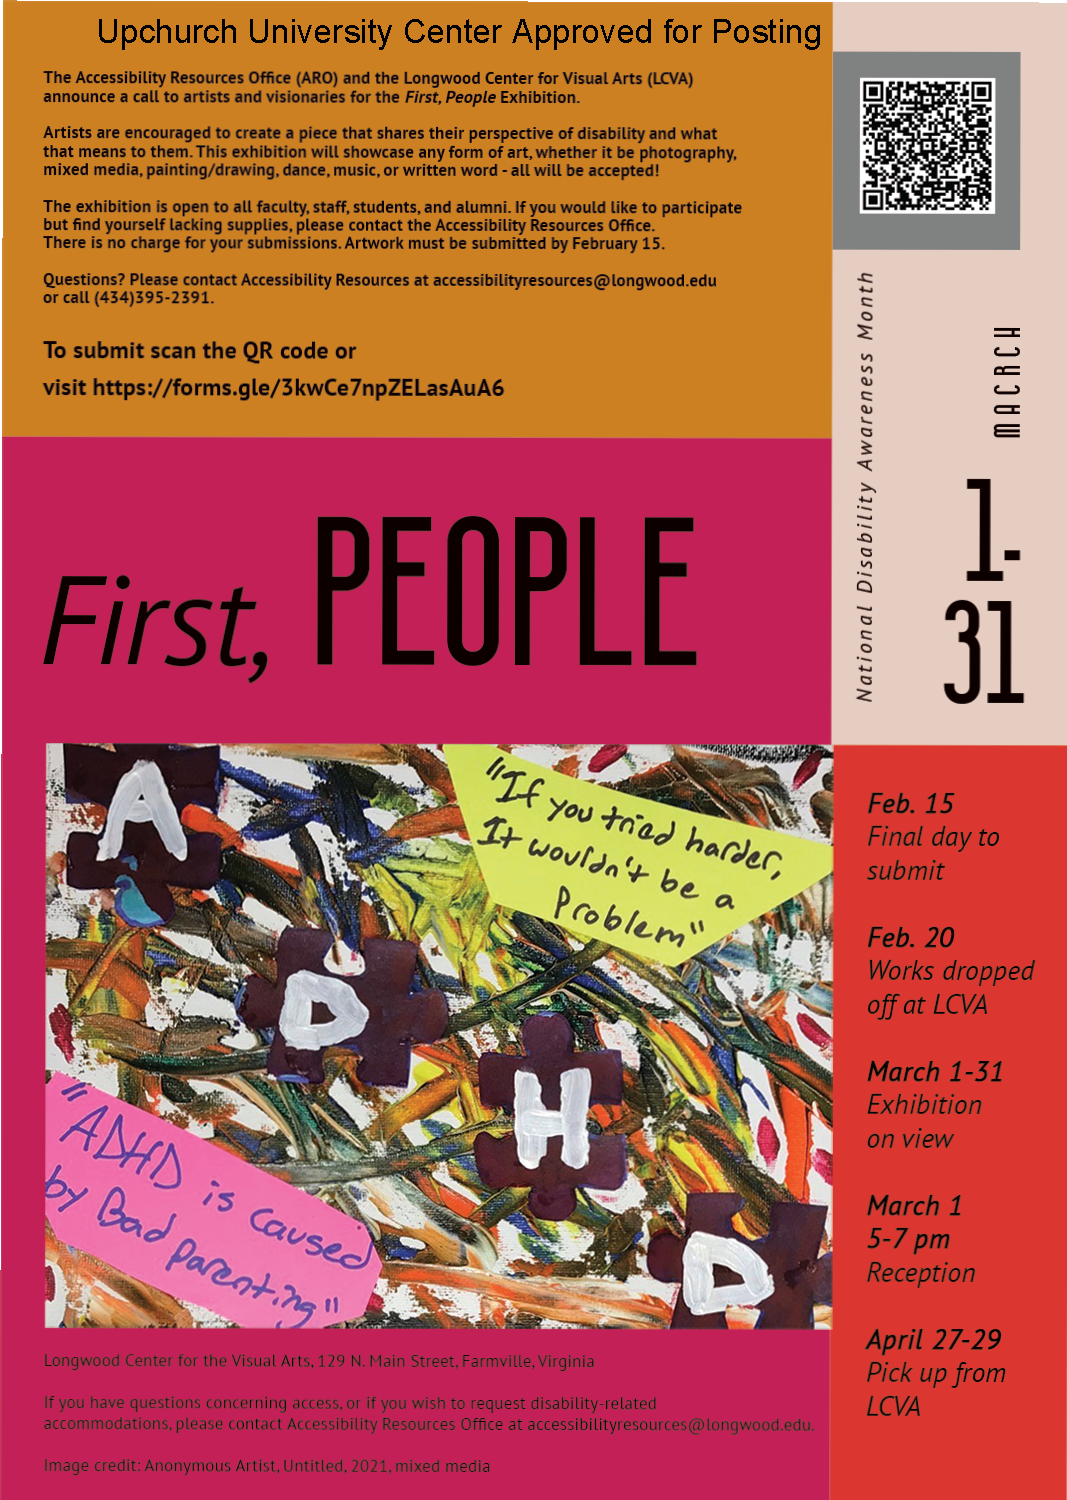 First, People flyer